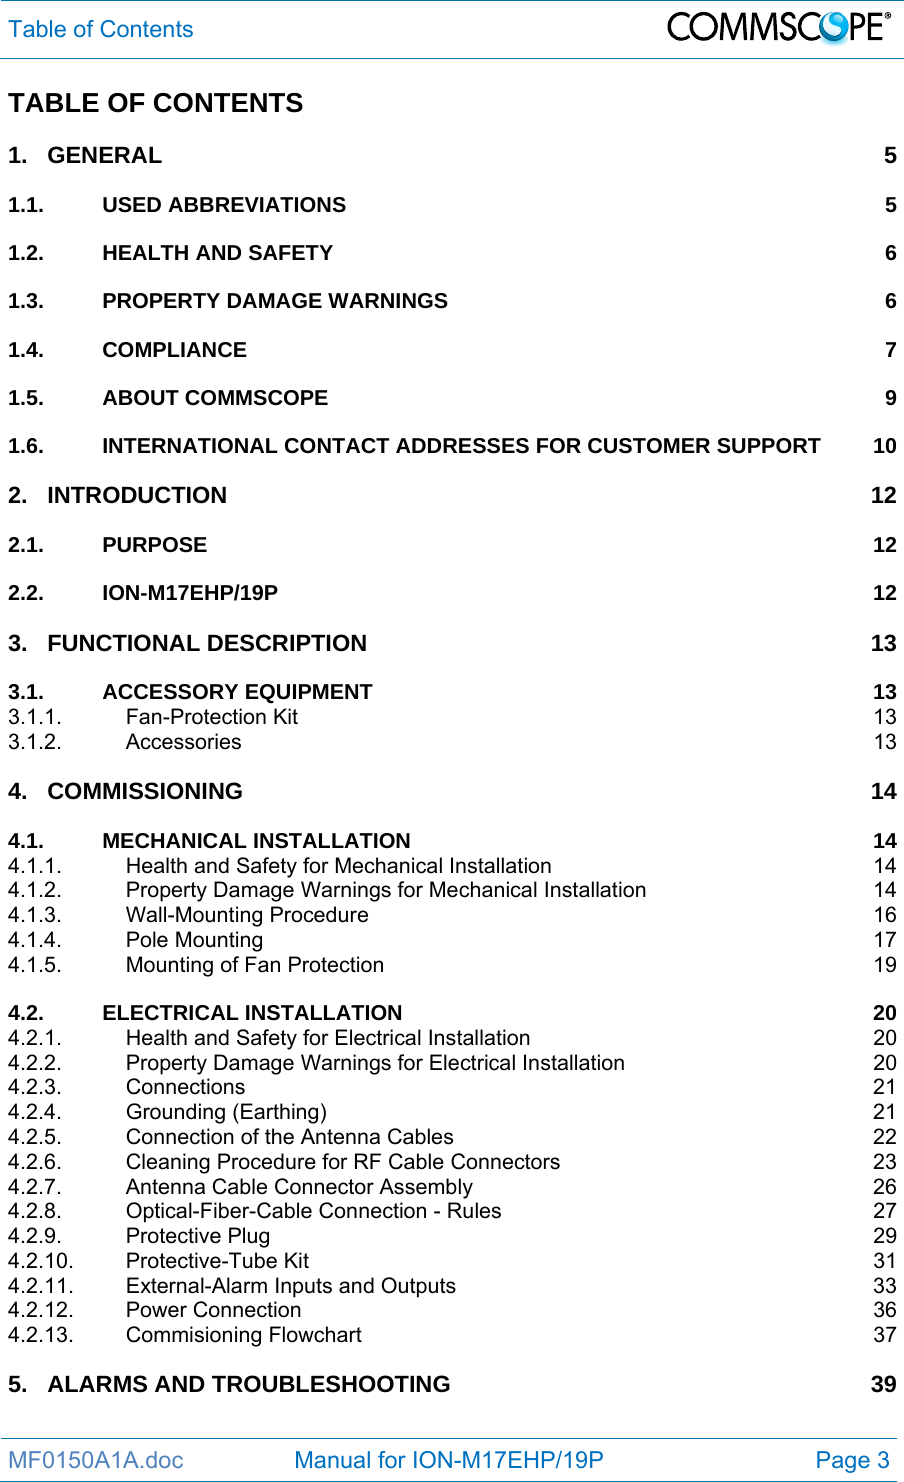 Table of Contents  MF0150A1A.doc                 Manual for ION-M17EHP/19P  Page 3 TABLE OF CONTENTS 1.GENERAL 51.1.USED ABBREVIATIONS  51.2.HEALTH AND SAFETY  61.3.PROPERTY DAMAGE WARNINGS  61.4.COMPLIANCE 71.5.ABOUT COMMSCOPE  91.6.INTERNATIONAL CONTACT ADDRESSES FOR CUSTOMER SUPPORT  102.INTRODUCTION 122.1.PURPOSE 122.2.ION-M17EHP/19P 123.FUNCTIONAL DESCRIPTION  133.1.ACCESSORY EQUIPMENT  133.1.1.Fan-Protection Kit  133.1.2.Accessories 134.COMMISSIONING 144.1.MECHANICAL INSTALLATION  144.1.1.Health and Safety for Mechanical Installation  144.1.2.Property Damage Warnings for Mechanical Installation  144.1.3.Wall-Mounting Procedure  164.1.4.Pole Mounting  174.1.5.Mounting of Fan Protection  194.2.ELECTRICAL INSTALLATION  204.2.1.Health and Safety for Electrical Installation  204.2.2.Property Damage Warnings for Electrical Installation  204.2.3.Connections 214.2.4.Grounding (Earthing)  214.2.5.Connection of the Antenna Cables  224.2.6.Cleaning Procedure for RF Cable Connectors  234.2.7.Antenna Cable Connector Assembly  264.2.8.Optical-Fiber-Cable Connection - Rules  274.2.9.Protective Plug  294.2.10.Protective-Tube Kit  314.2.11.External-Alarm Inputs and Outputs  334.2.12.Power Connection  364.2.13.Commisioning Flowchart  375.ALARMS AND TROUBLESHOOTING  39